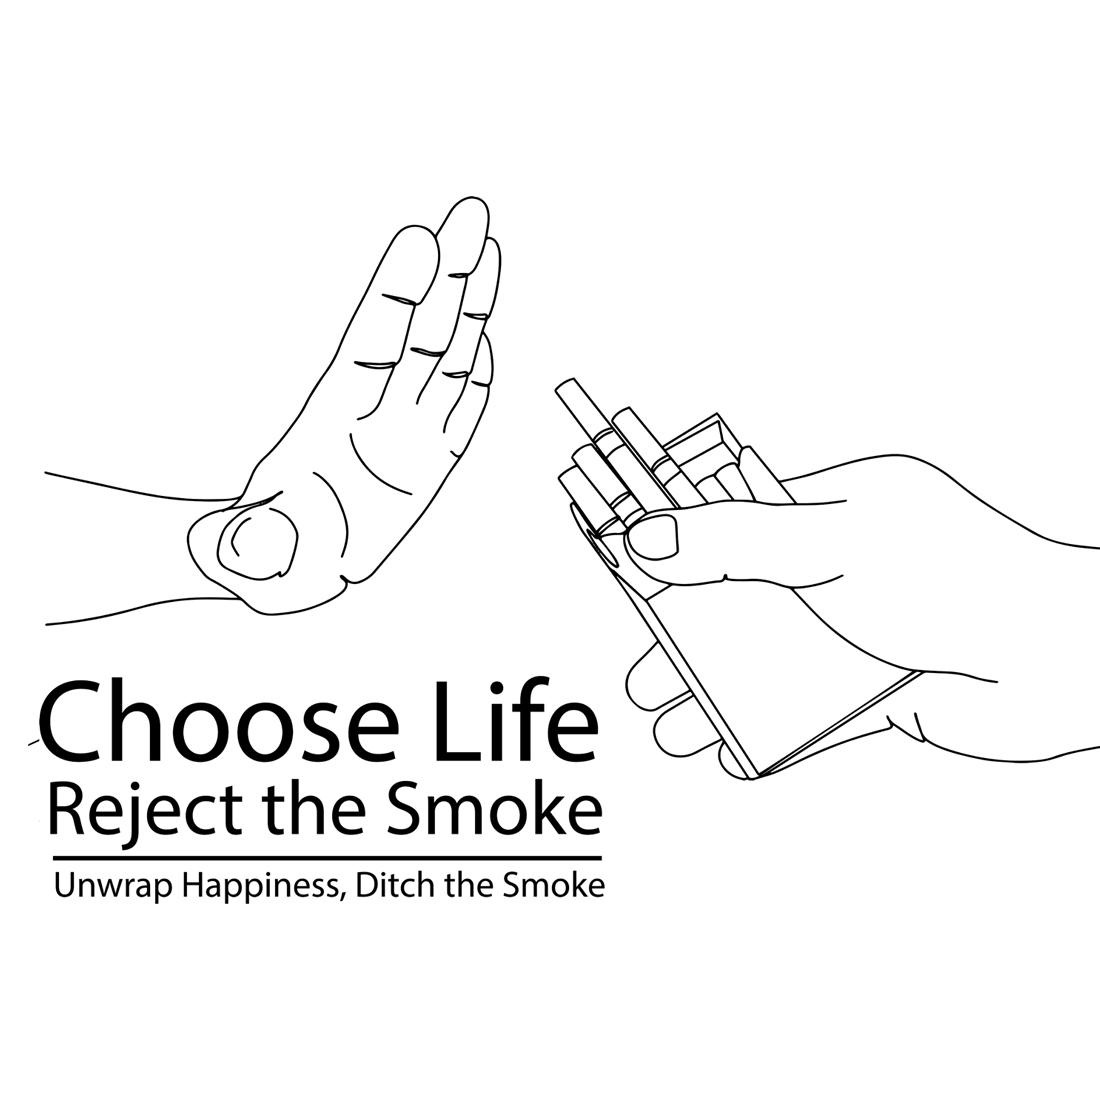 World No Tobacco Day Poster: Say No to Smoking "Cartoon Illustration: Hand Rejecting Cigarette" "Quit Smoking Concept: Hand Gesturing No" "No Cigarette Allowed: Anti-Smoking Illustration" preview image.